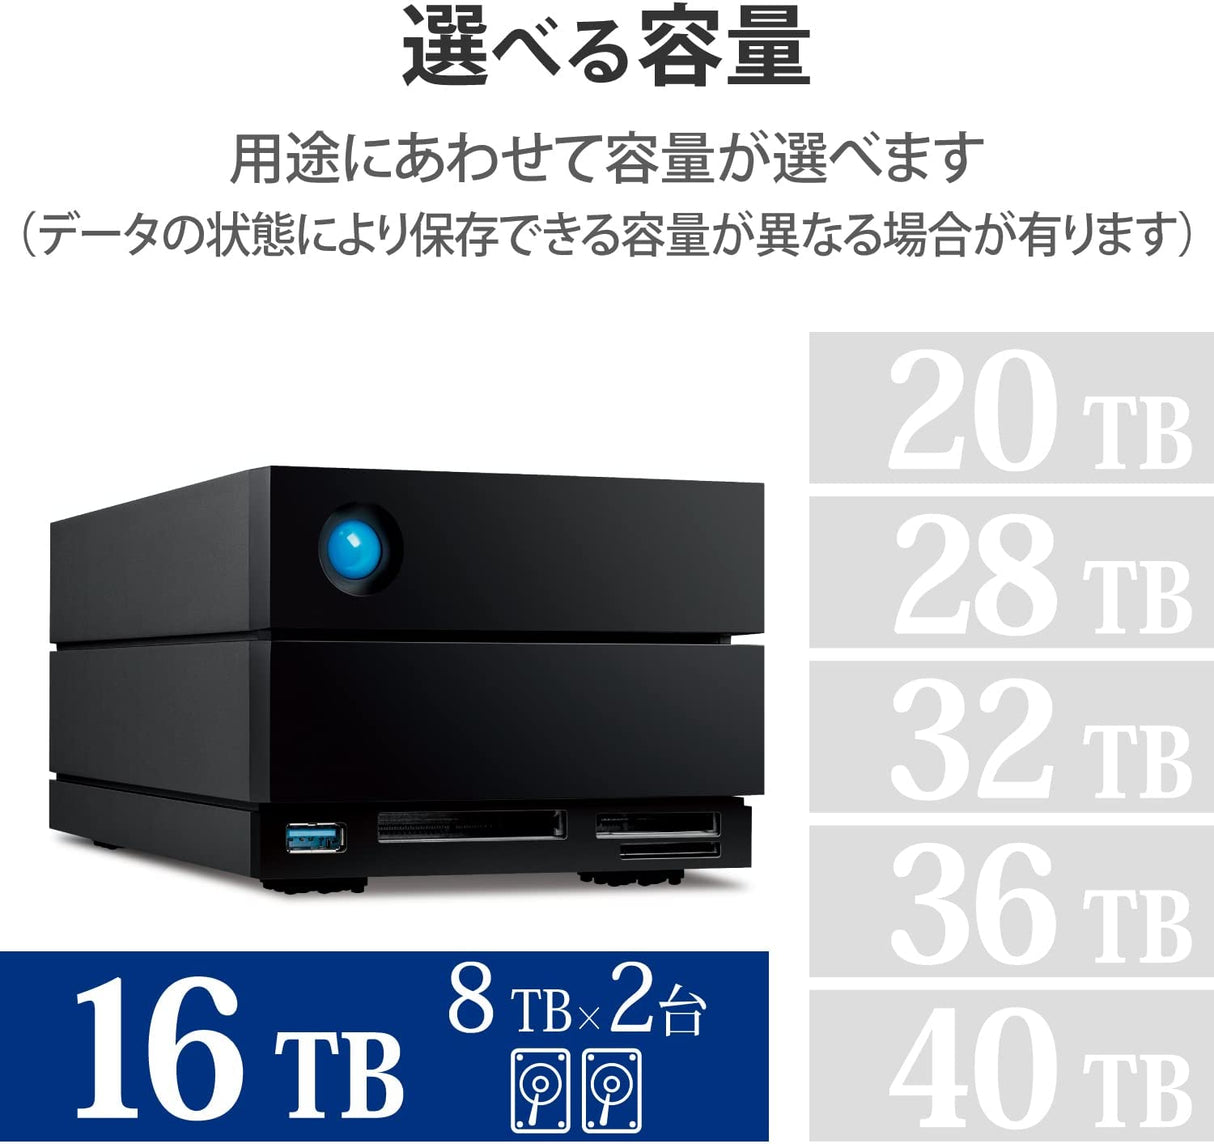 Seagate LaCie 2big Dock RAID 16TB External HDD - Thunderbolt and USB4 Compatibility, Data Recovery (STLG16000400)